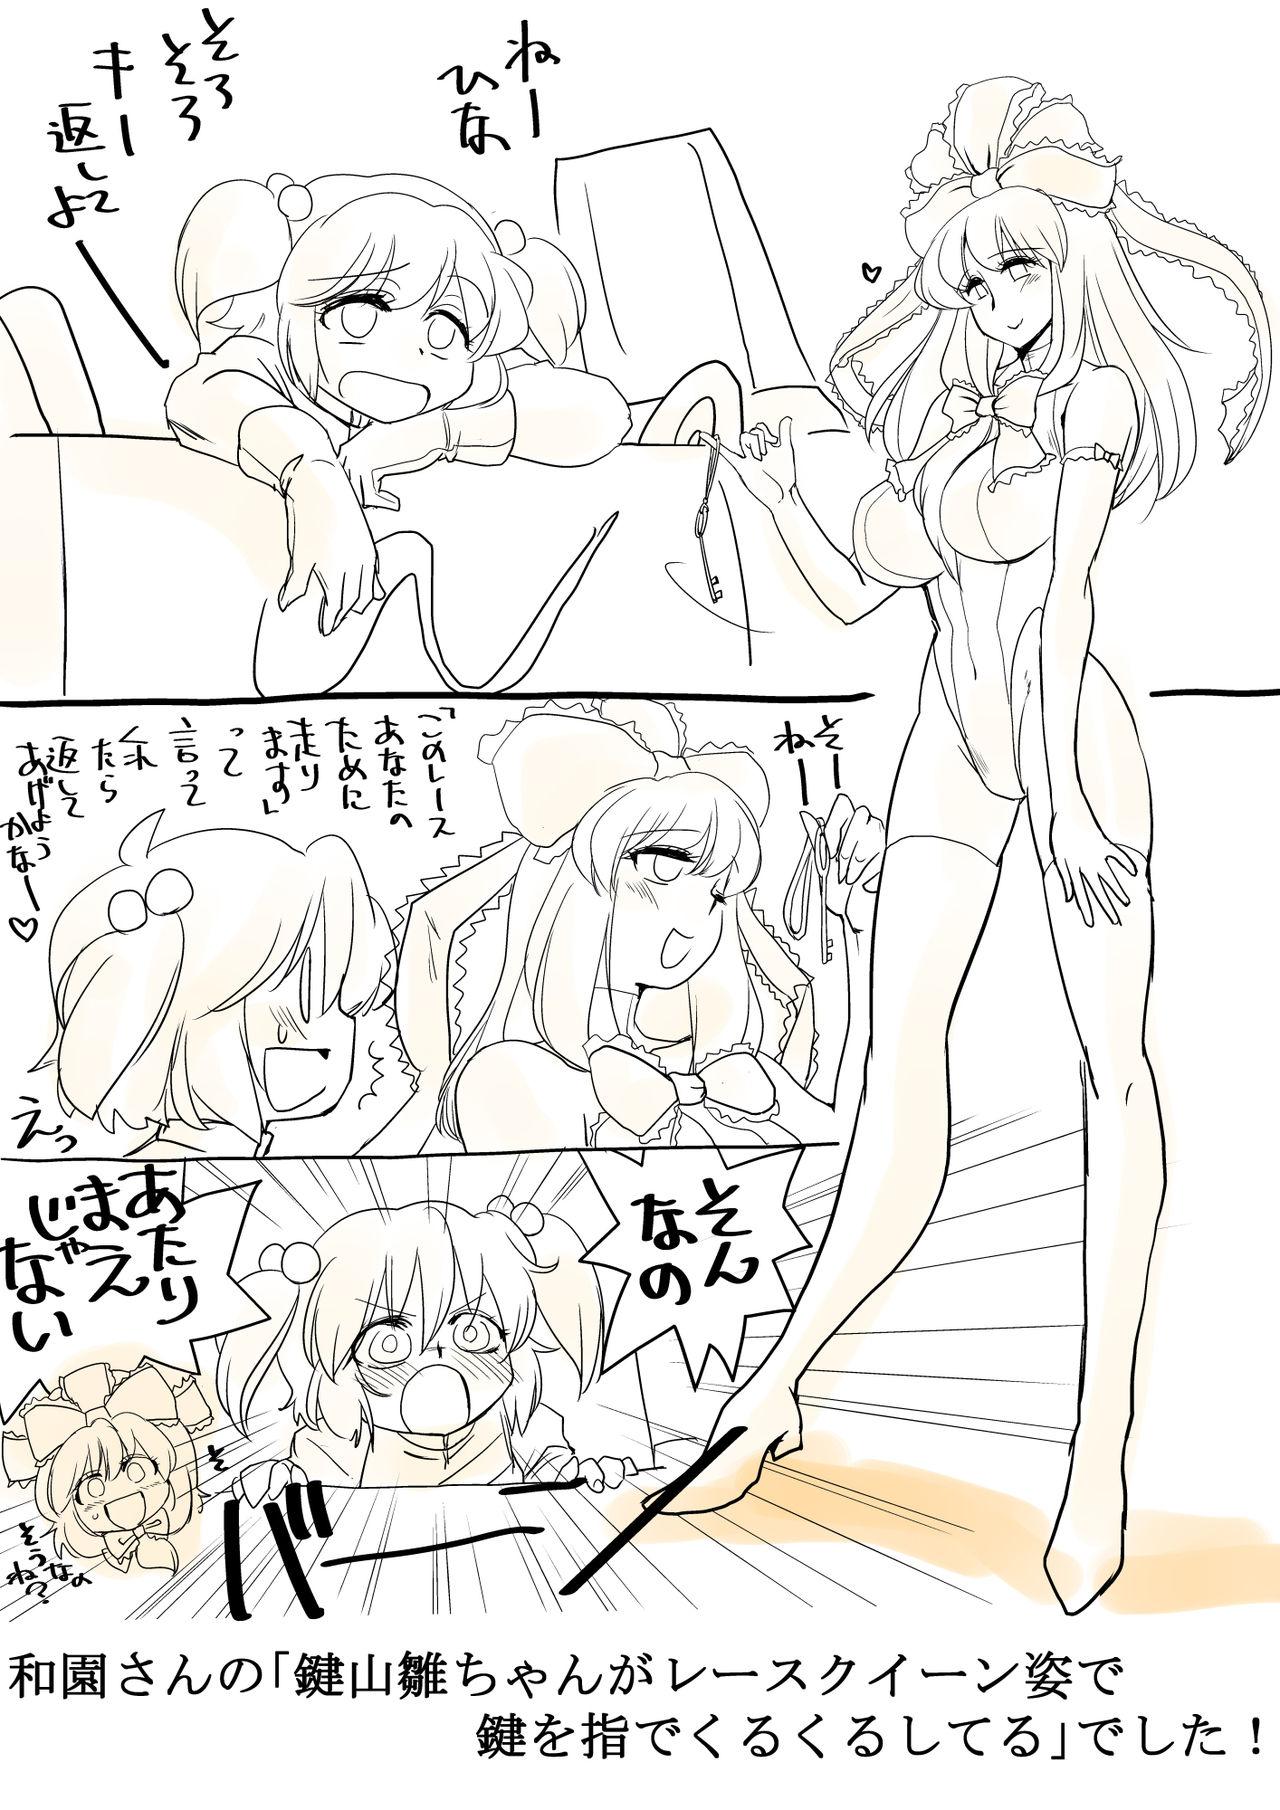 Best Blow Job Ever Touhou Request CG Shuu Sono 2 - Touhou project Real Orgasms - Page 8